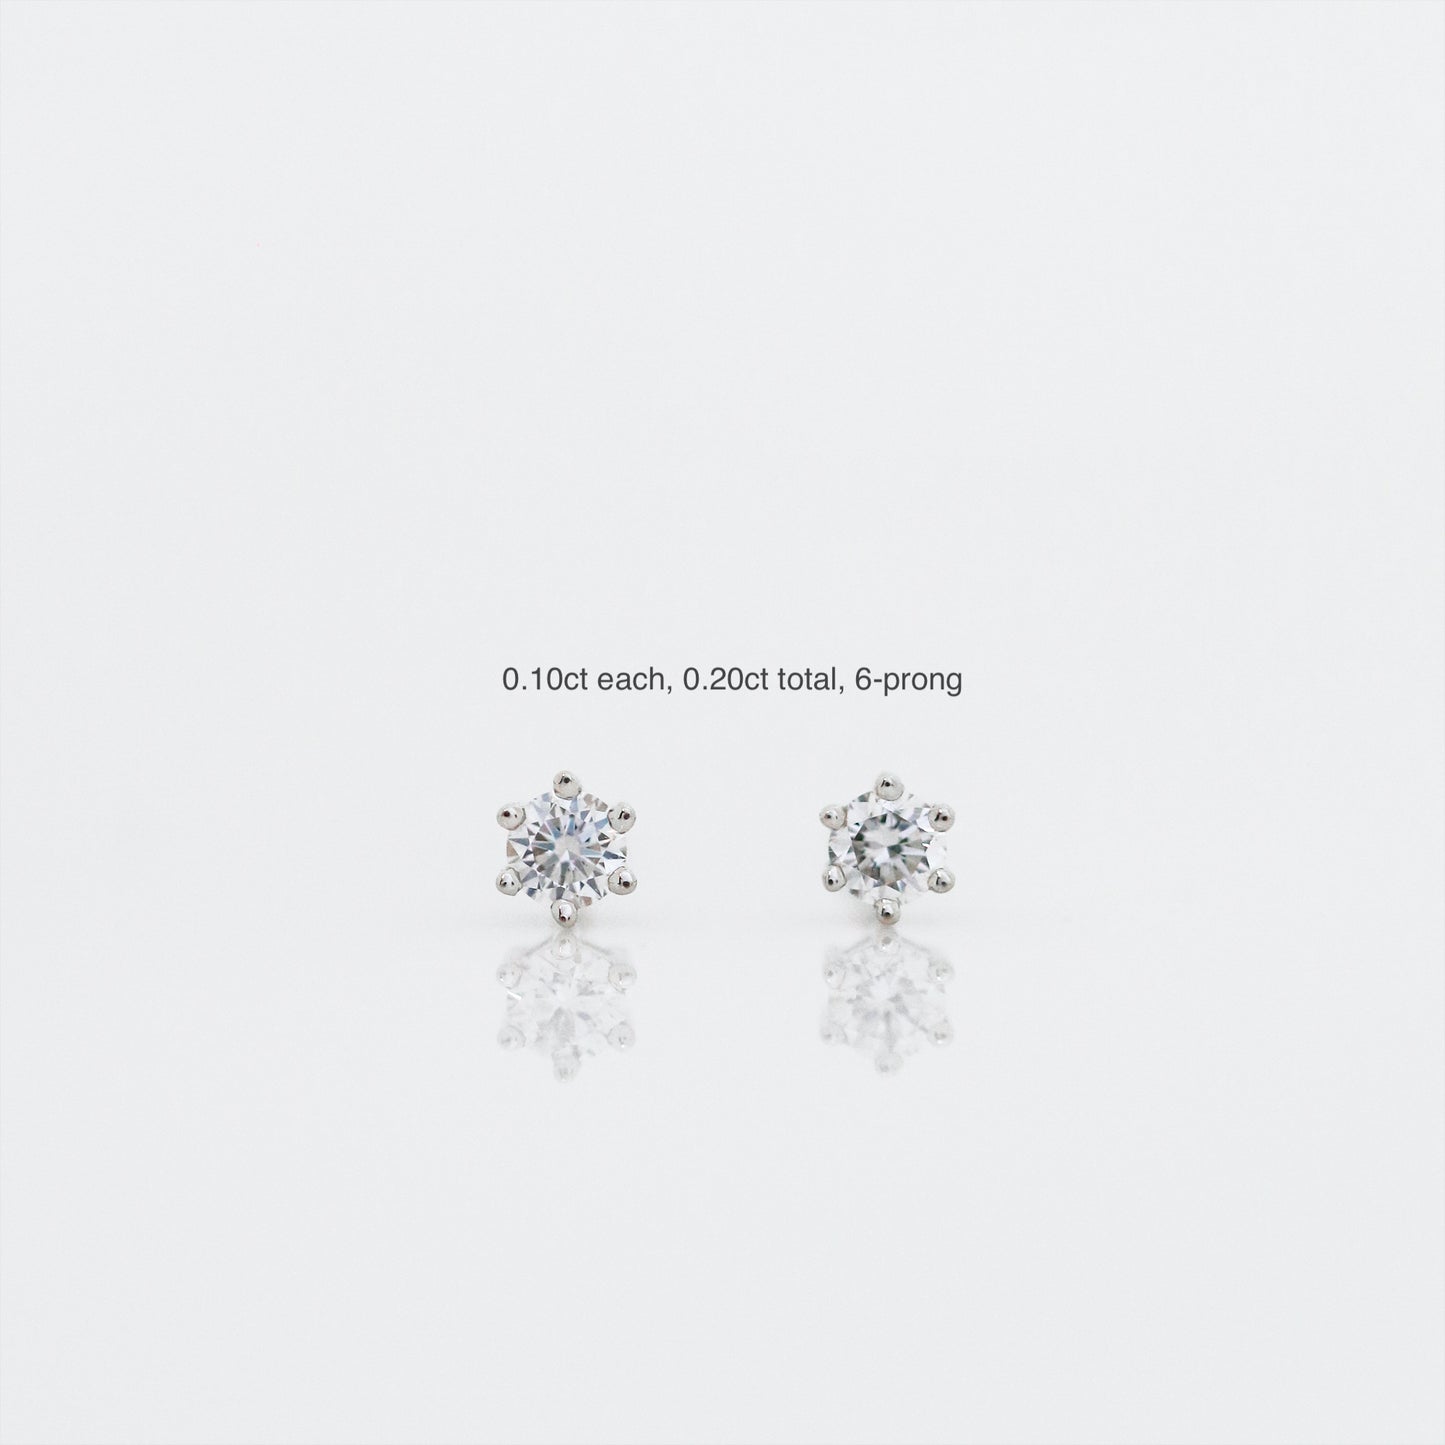 18k White Gold Classic 4-prong/6-prong Round Diamond Stud Earrings, Single or Pair